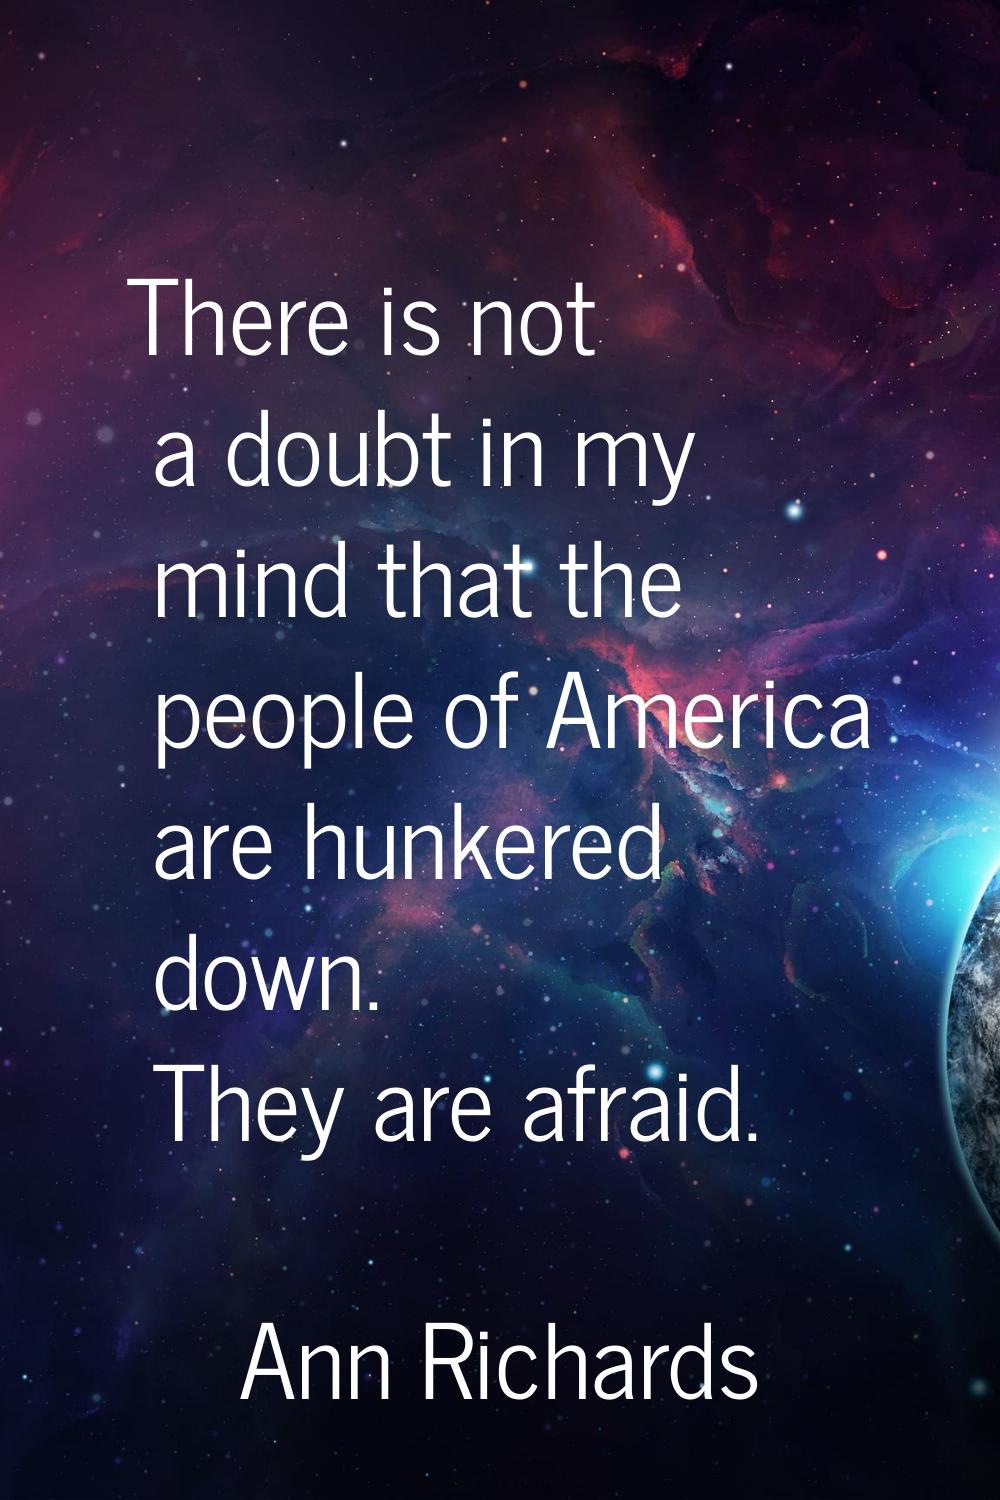 There is not a doubt in my mind that the people of America are hunkered down. They are afraid.